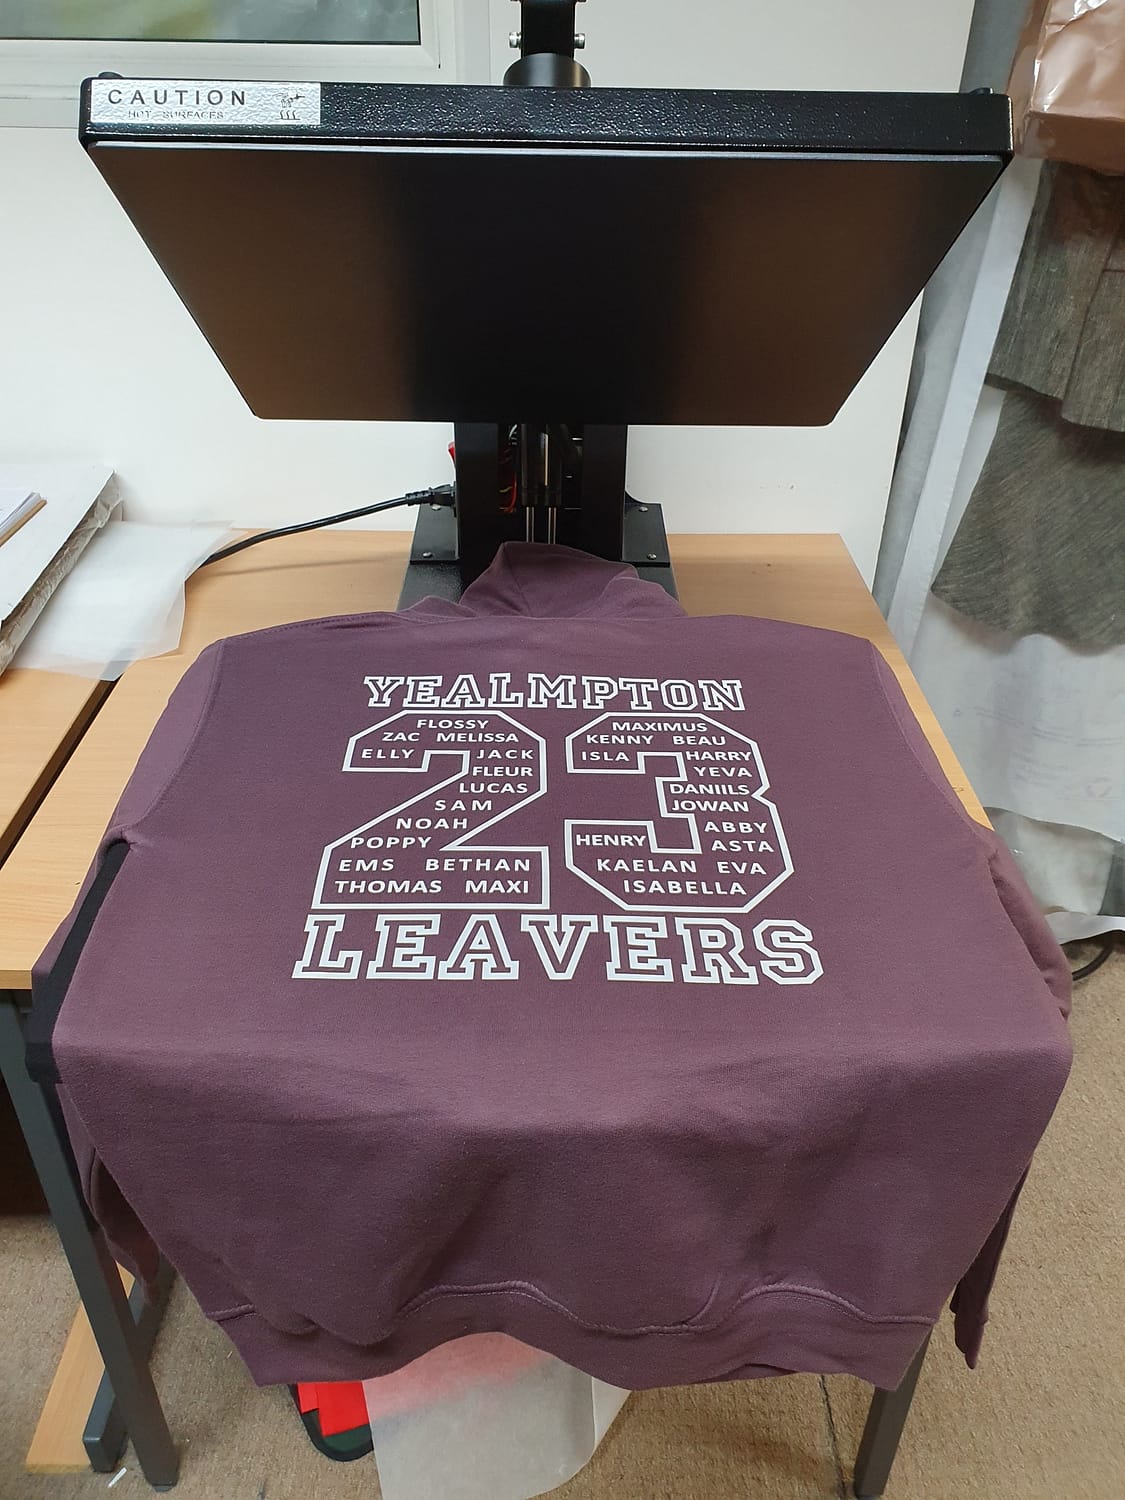 Clothing with printed design, in a printing press